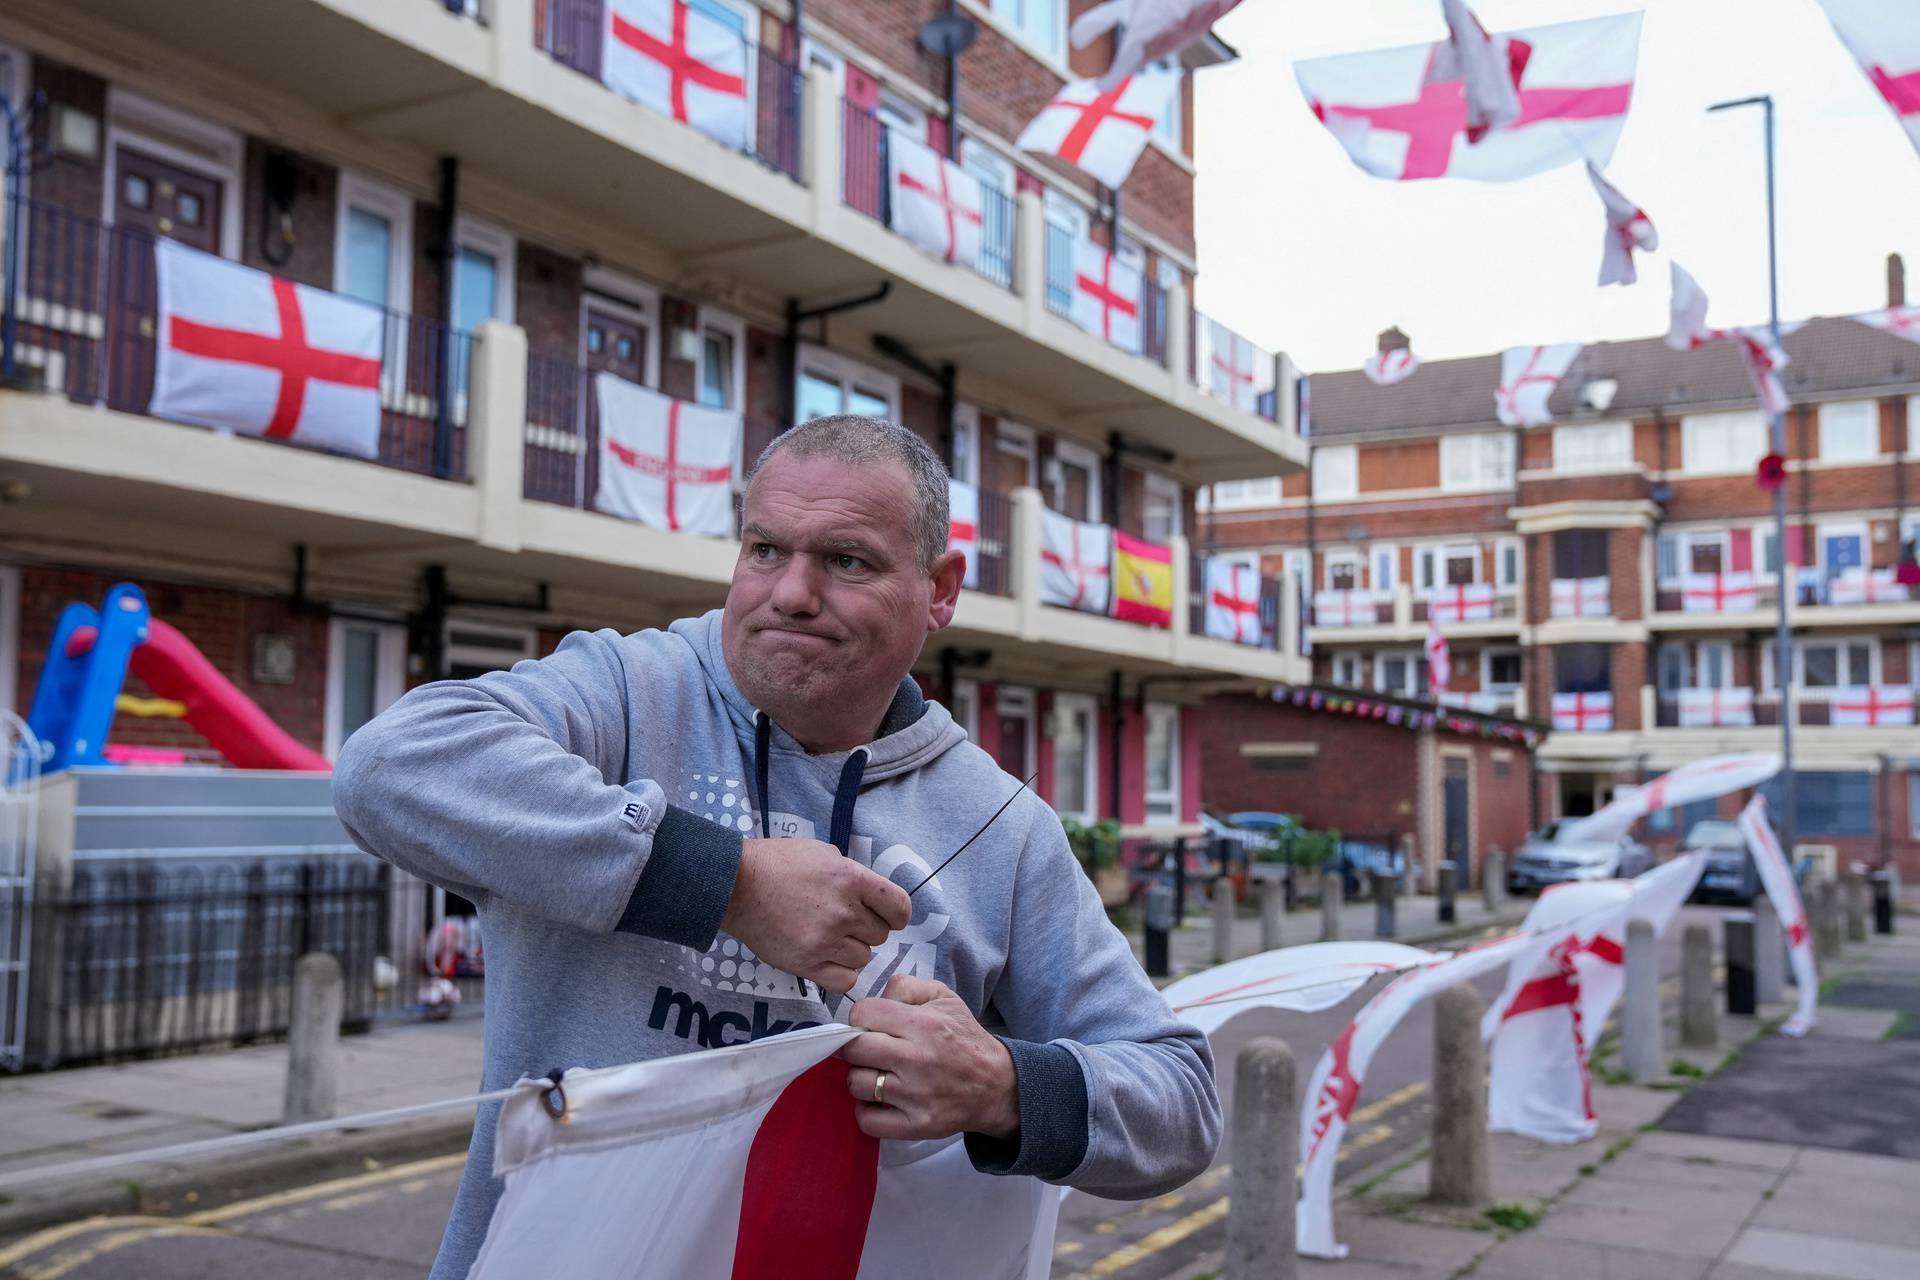 The Kirby estate is being decorated with England Flags ahead World Cup 2022